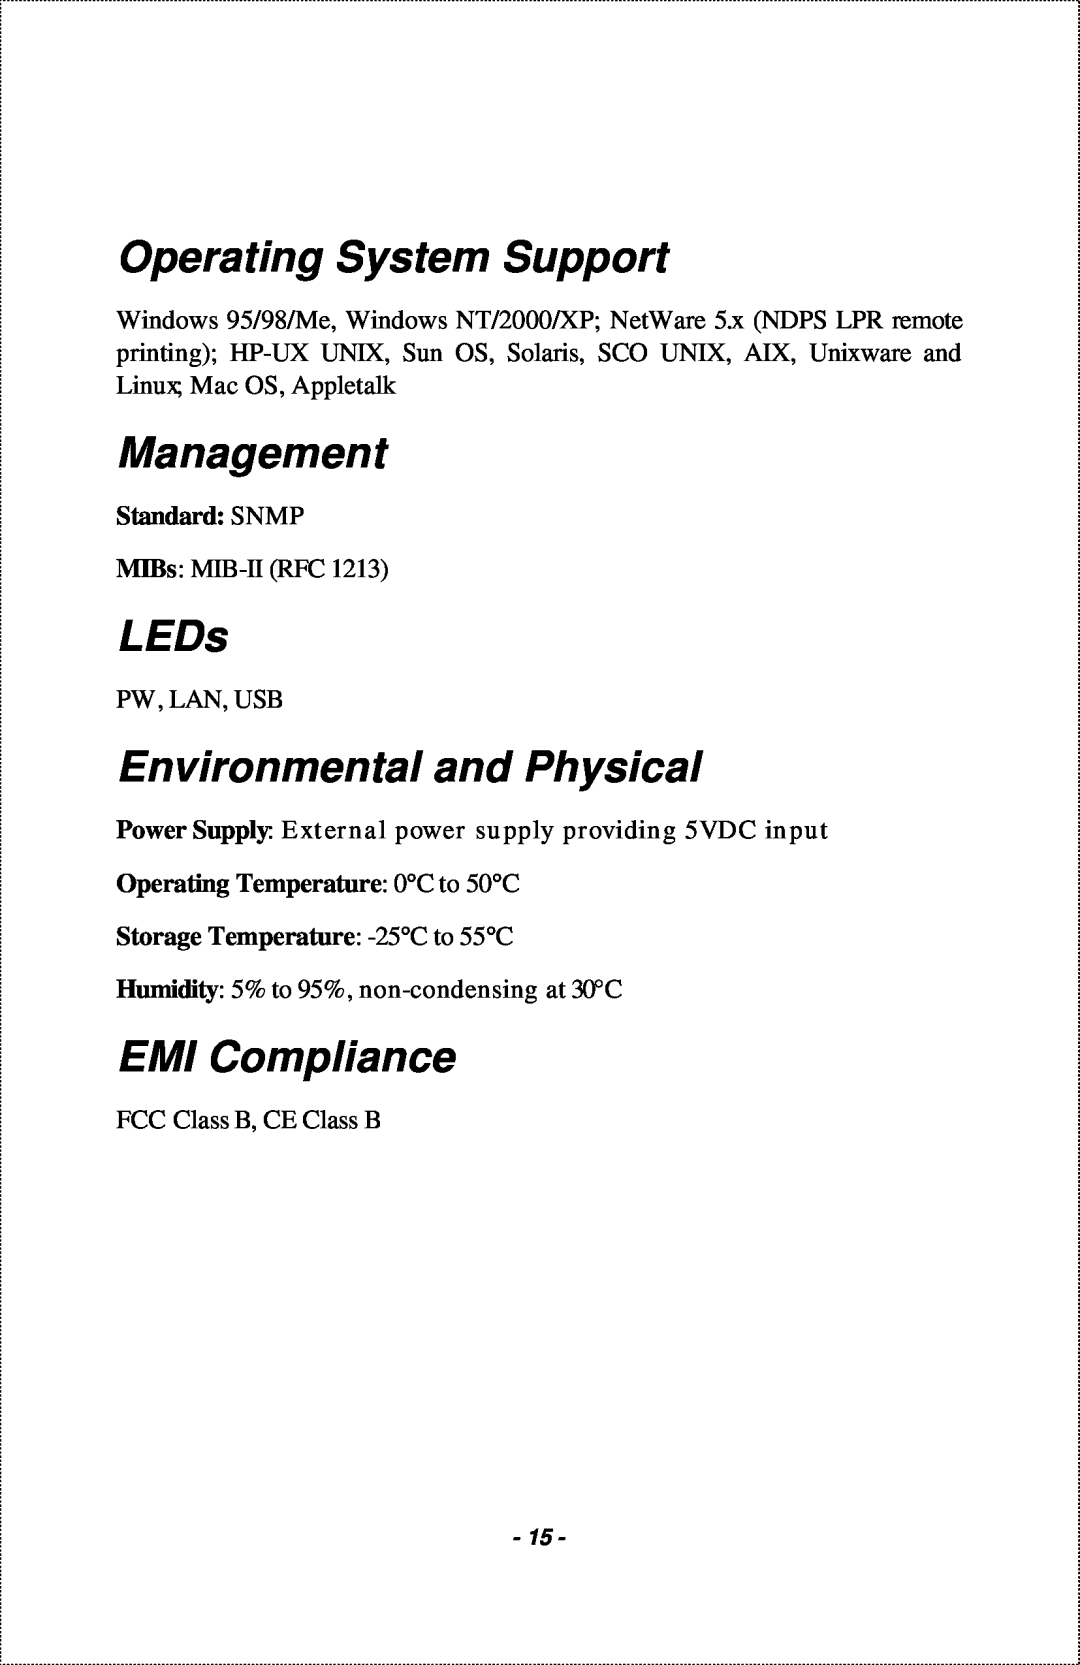 IBM 1-Port USB Print Server manual Operating System Support, Management, LEDs, Environmental and Physical, EMI Compliance 